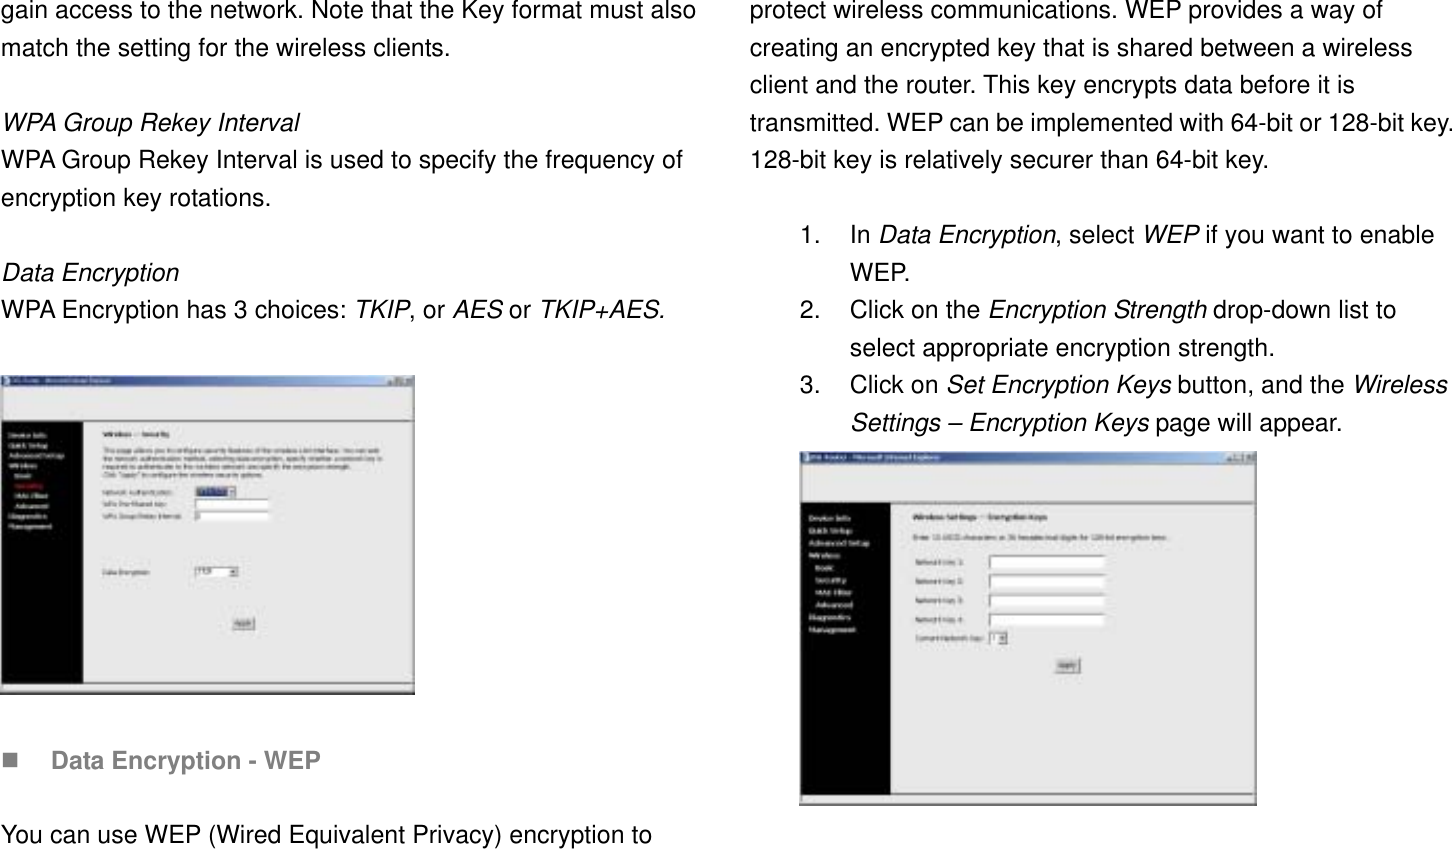 gain access to the network. Note that the Key format must also match the setting for the wireless clients.  WPA Group Rekey Interval WPA Group Rekey Interval is used to specify the frequency of encryption key rotations.  Data Encryption WPA Encryption has 3 choices: TKIP, or AES or TKIP+AES.      Data Encryption - WEP  You can use WEP (Wired Equivalent Privacy) encryption to protect wireless communications. WEP provides a way of creating an encrypted key that is shared between a wireless client and the router. This key encrypts data before it is transmitted. WEP can be implemented with 64-bit or 128-bit key. 128-bit key is relatively securer than 64-bit key.    1. In Data Encryption, select WEP if you want to enable WEP. 2.  Click on the Encryption Strength drop-down list to select appropriate encryption strength. 3. Click on Set Encryption Keys button, and the Wireless Settings – Encryption Keys page will appear.   